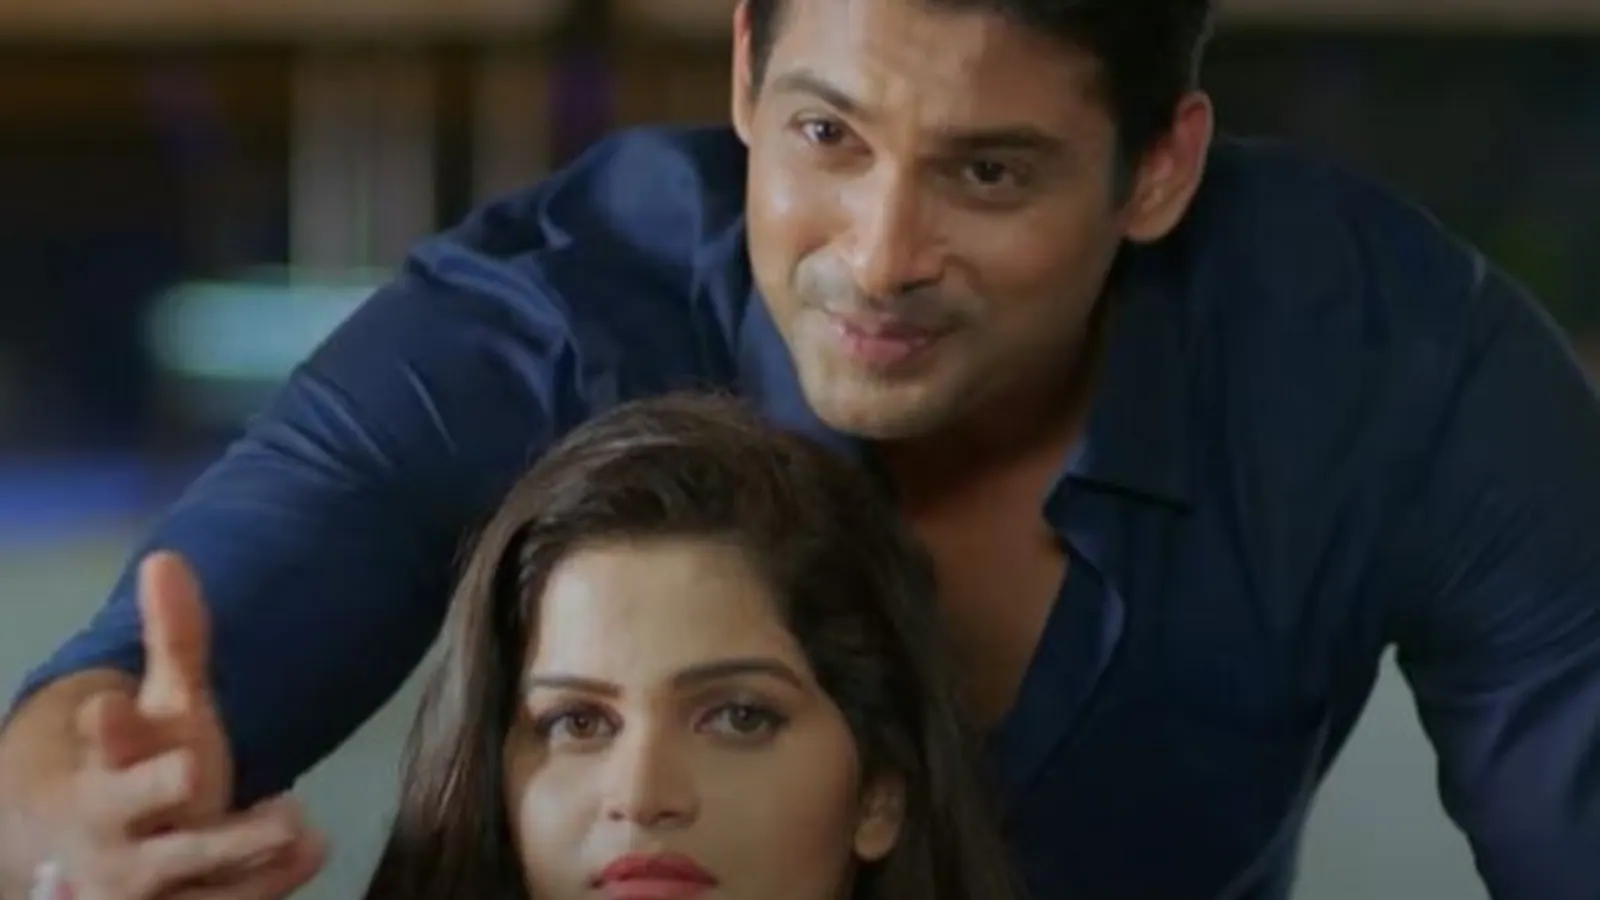 Sidharth Shukla’s last song Jeena Zaruri Hai released online, fans wonder if his family permitted it. Watch